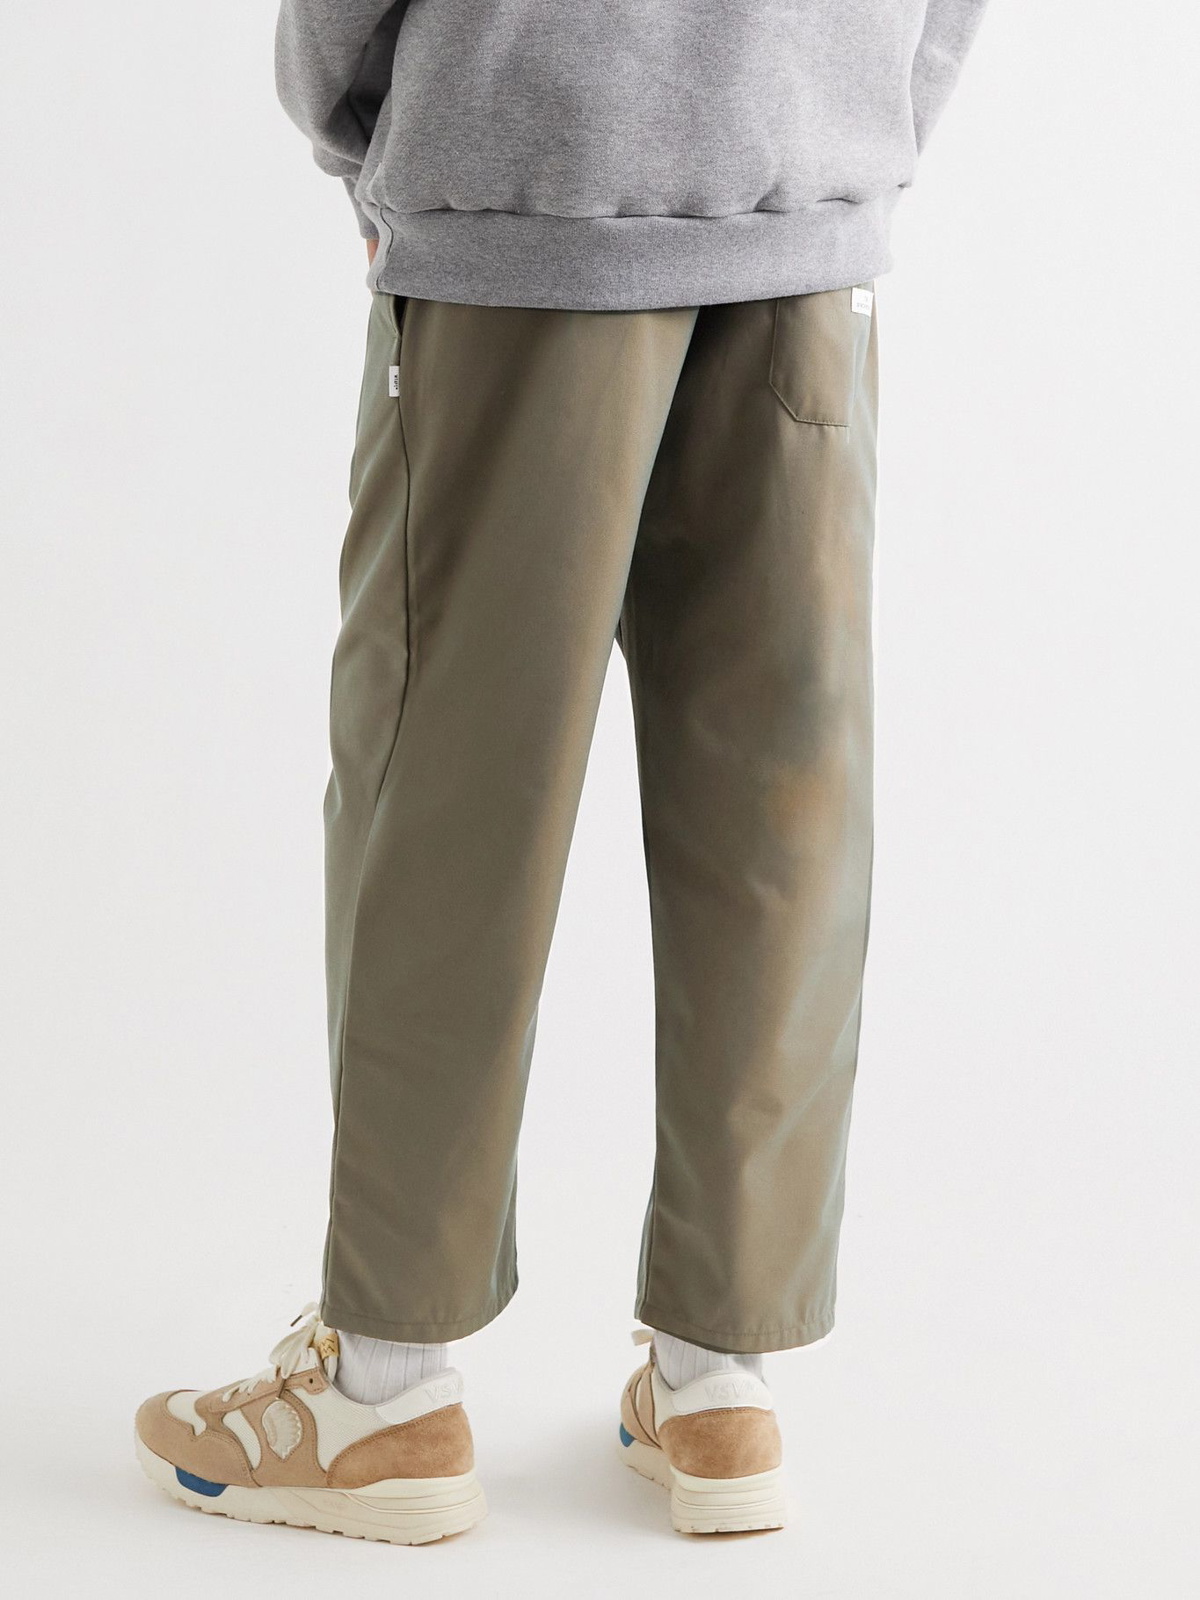 WTAPS - Seagull 02 EcoVero-Blend Twill Drawstring Trousers